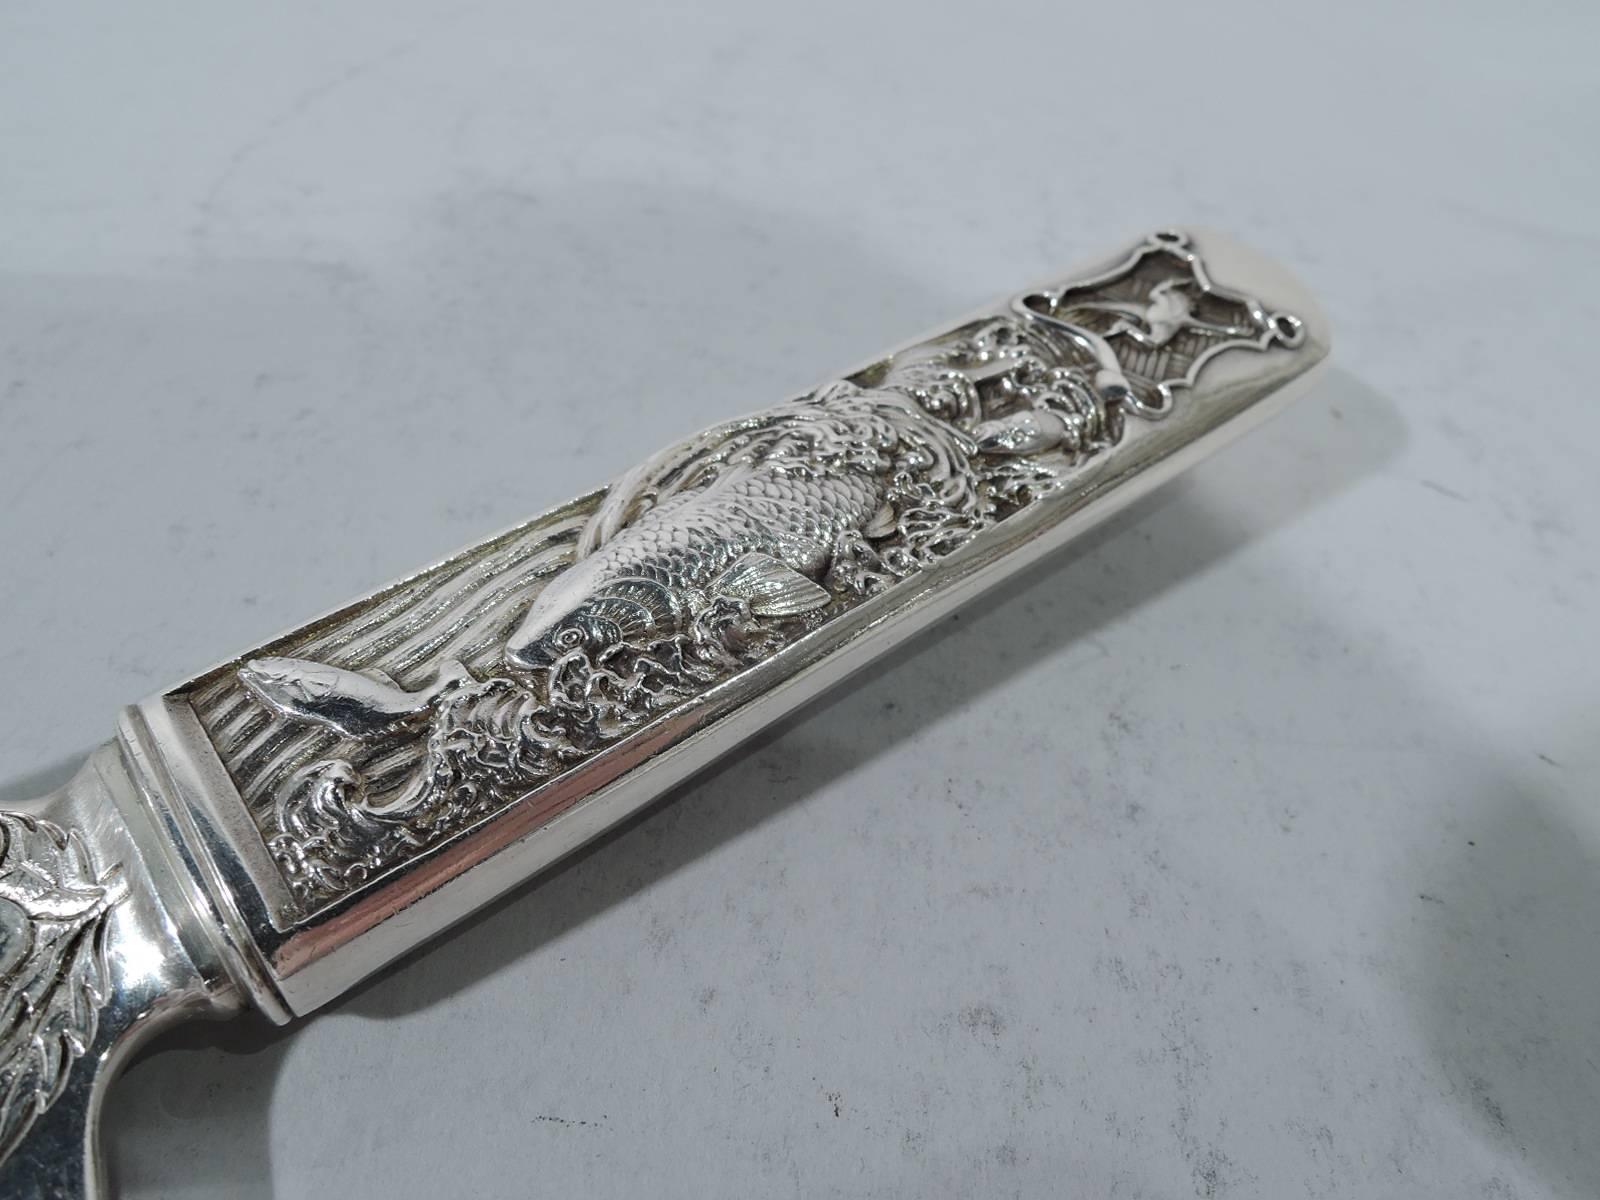 Japonesque sterling silver fish server in Hizen pattern. Made by Gorham in Providence. Rectilinear handle with flying crane, carp in wave, and flowers set in shaped frames and on wavy and patchwork grounds. Blade had scalloped top and engraved